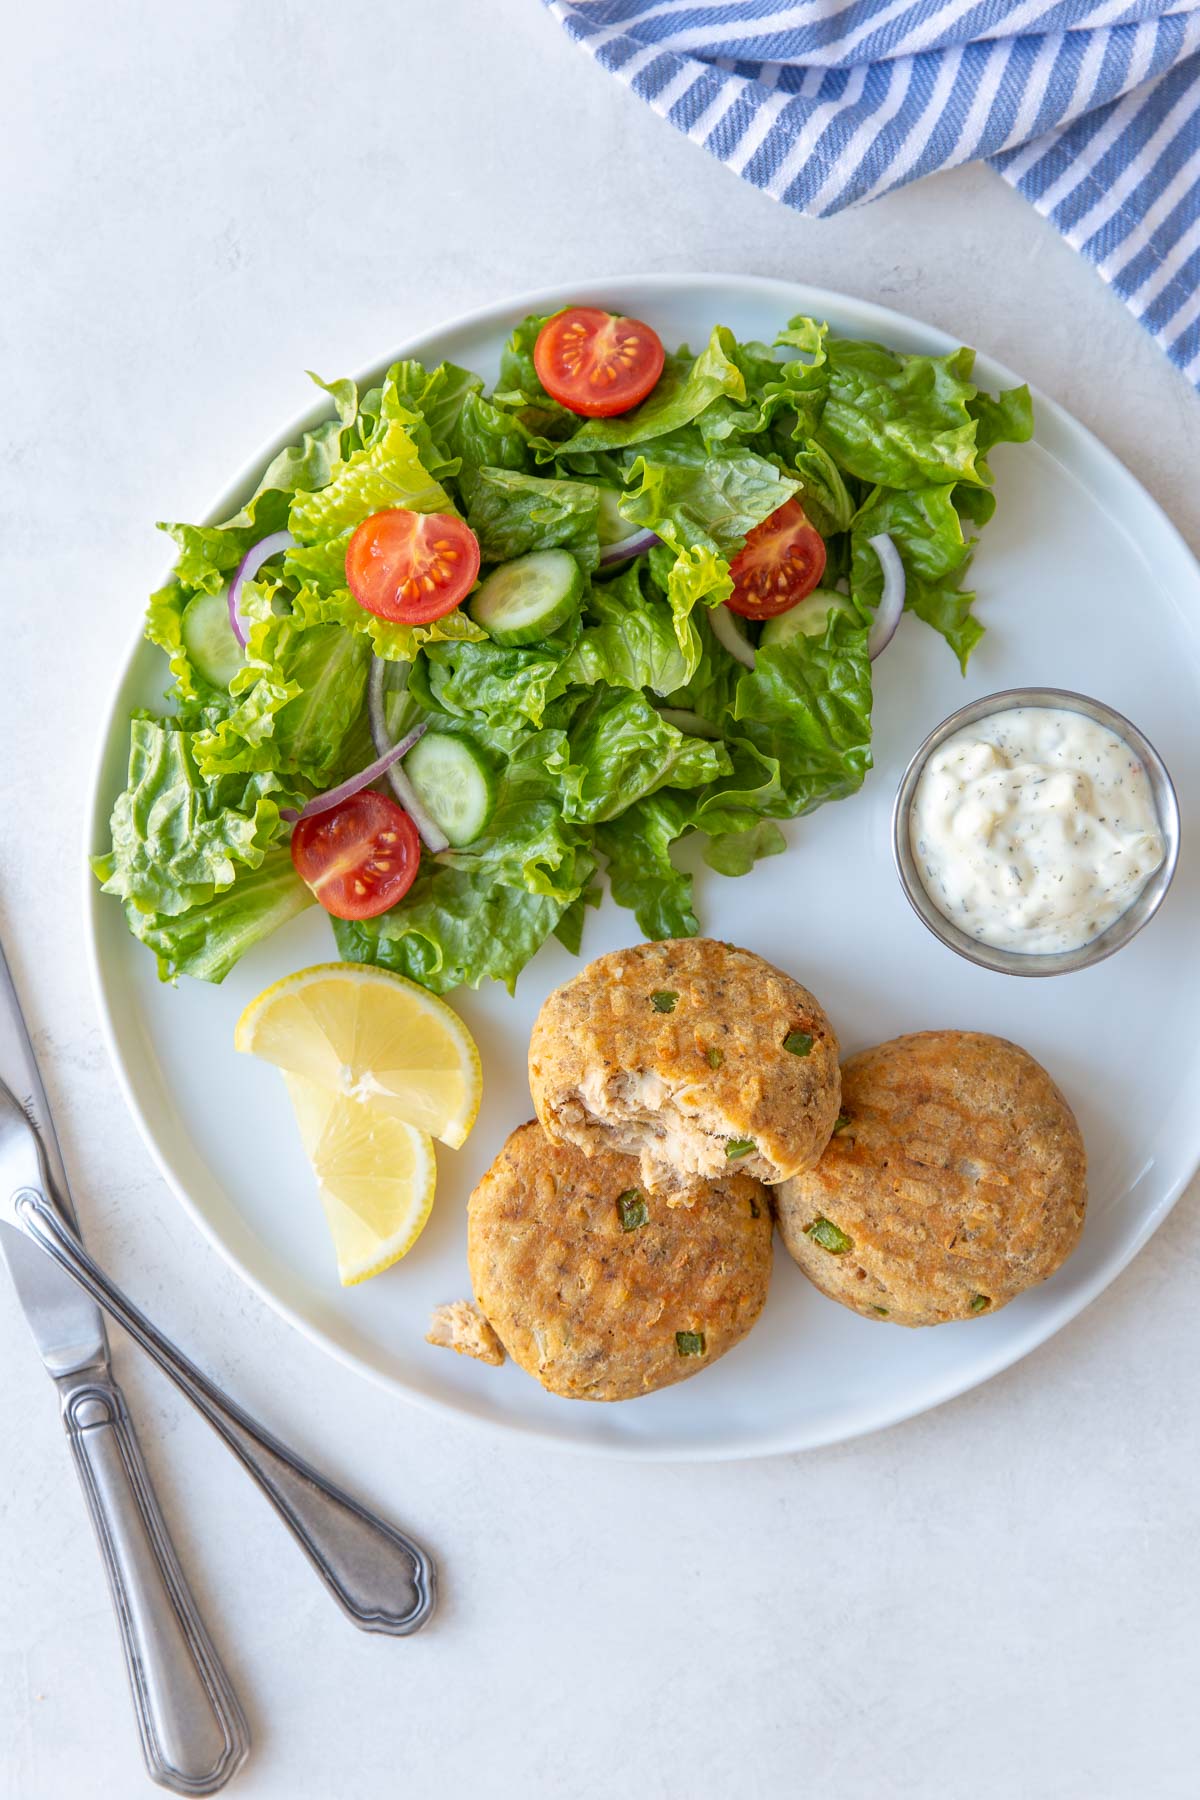 Three salmon patties on a white plate with a salad, lemon wedges and tartar sauce.